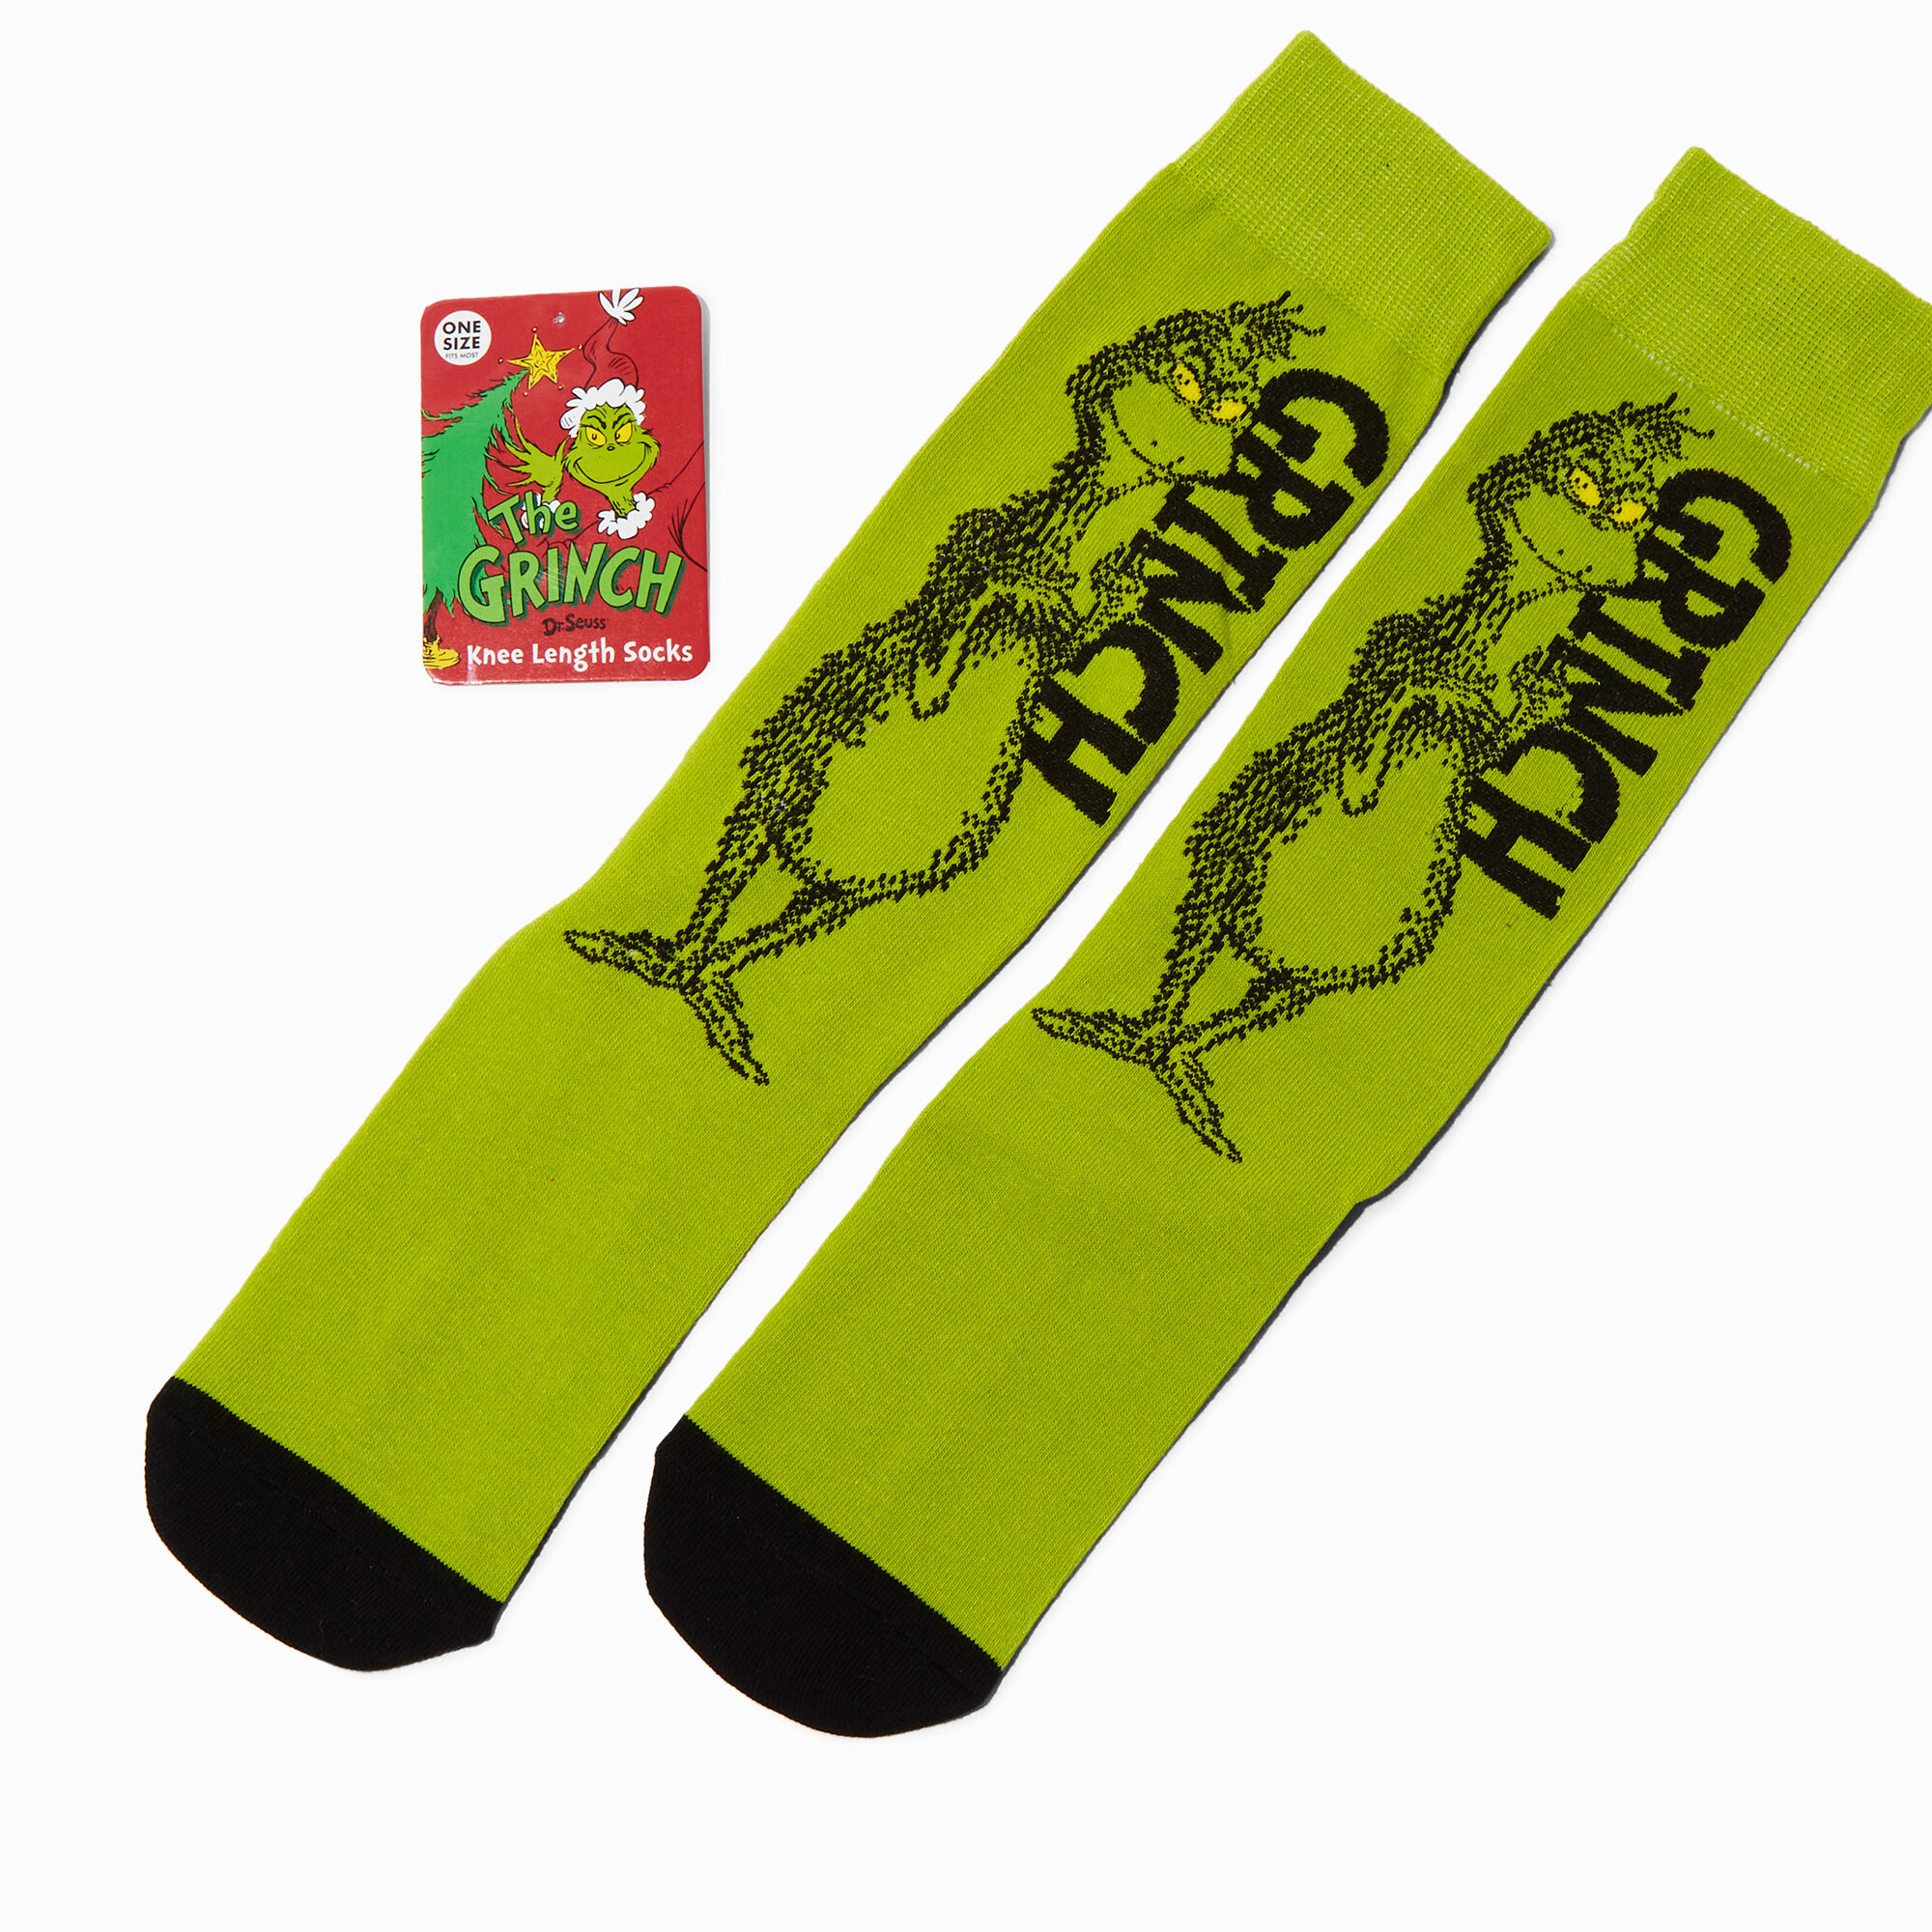 View Claires Dr Seuss The Grinch Knee High Socks information